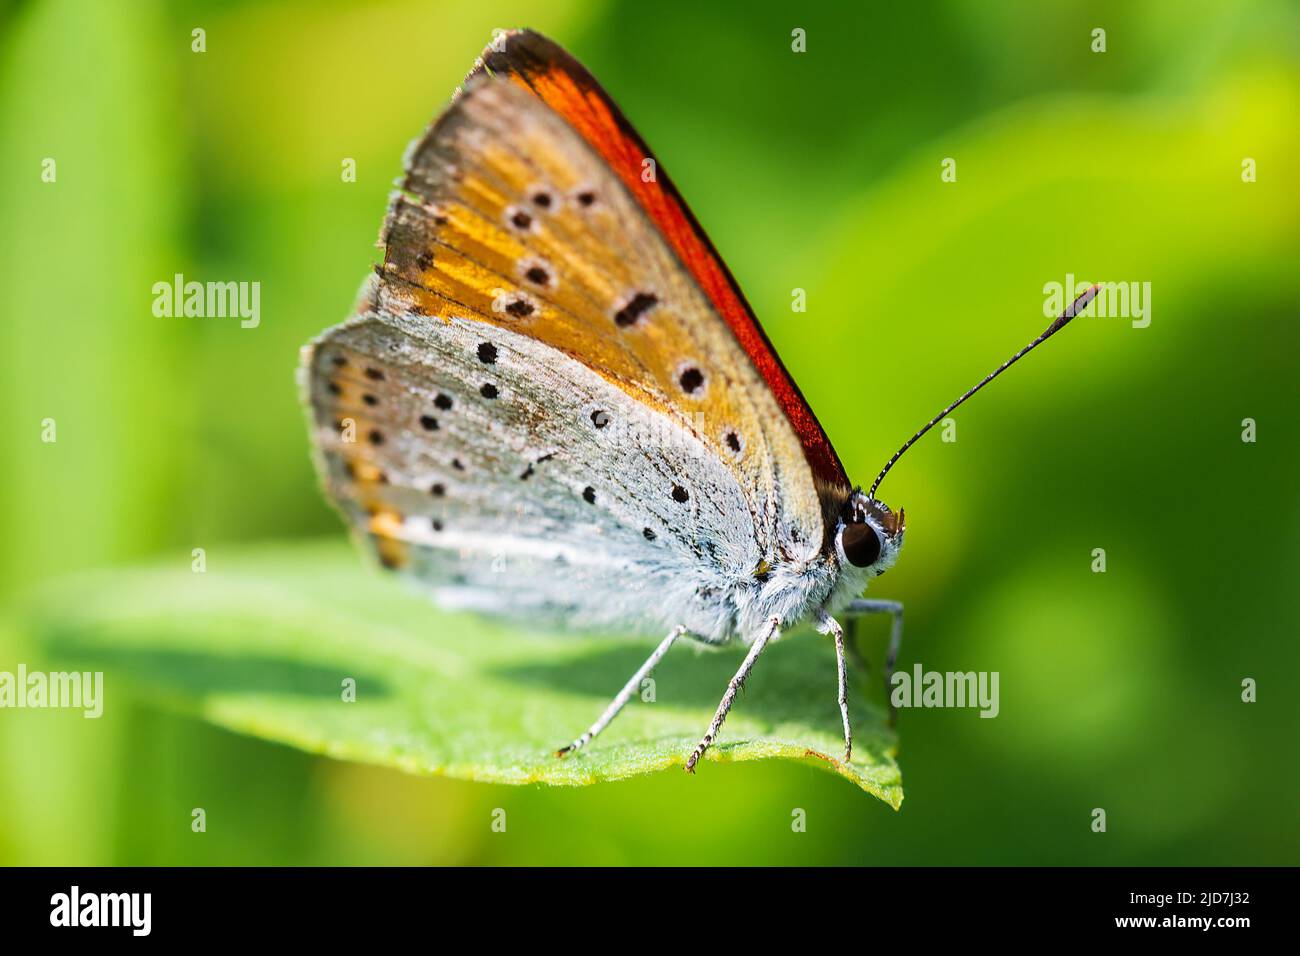 Large copper, lycaena dispar insect butterfly sitting on leaf from side. Animal background Stock Photo